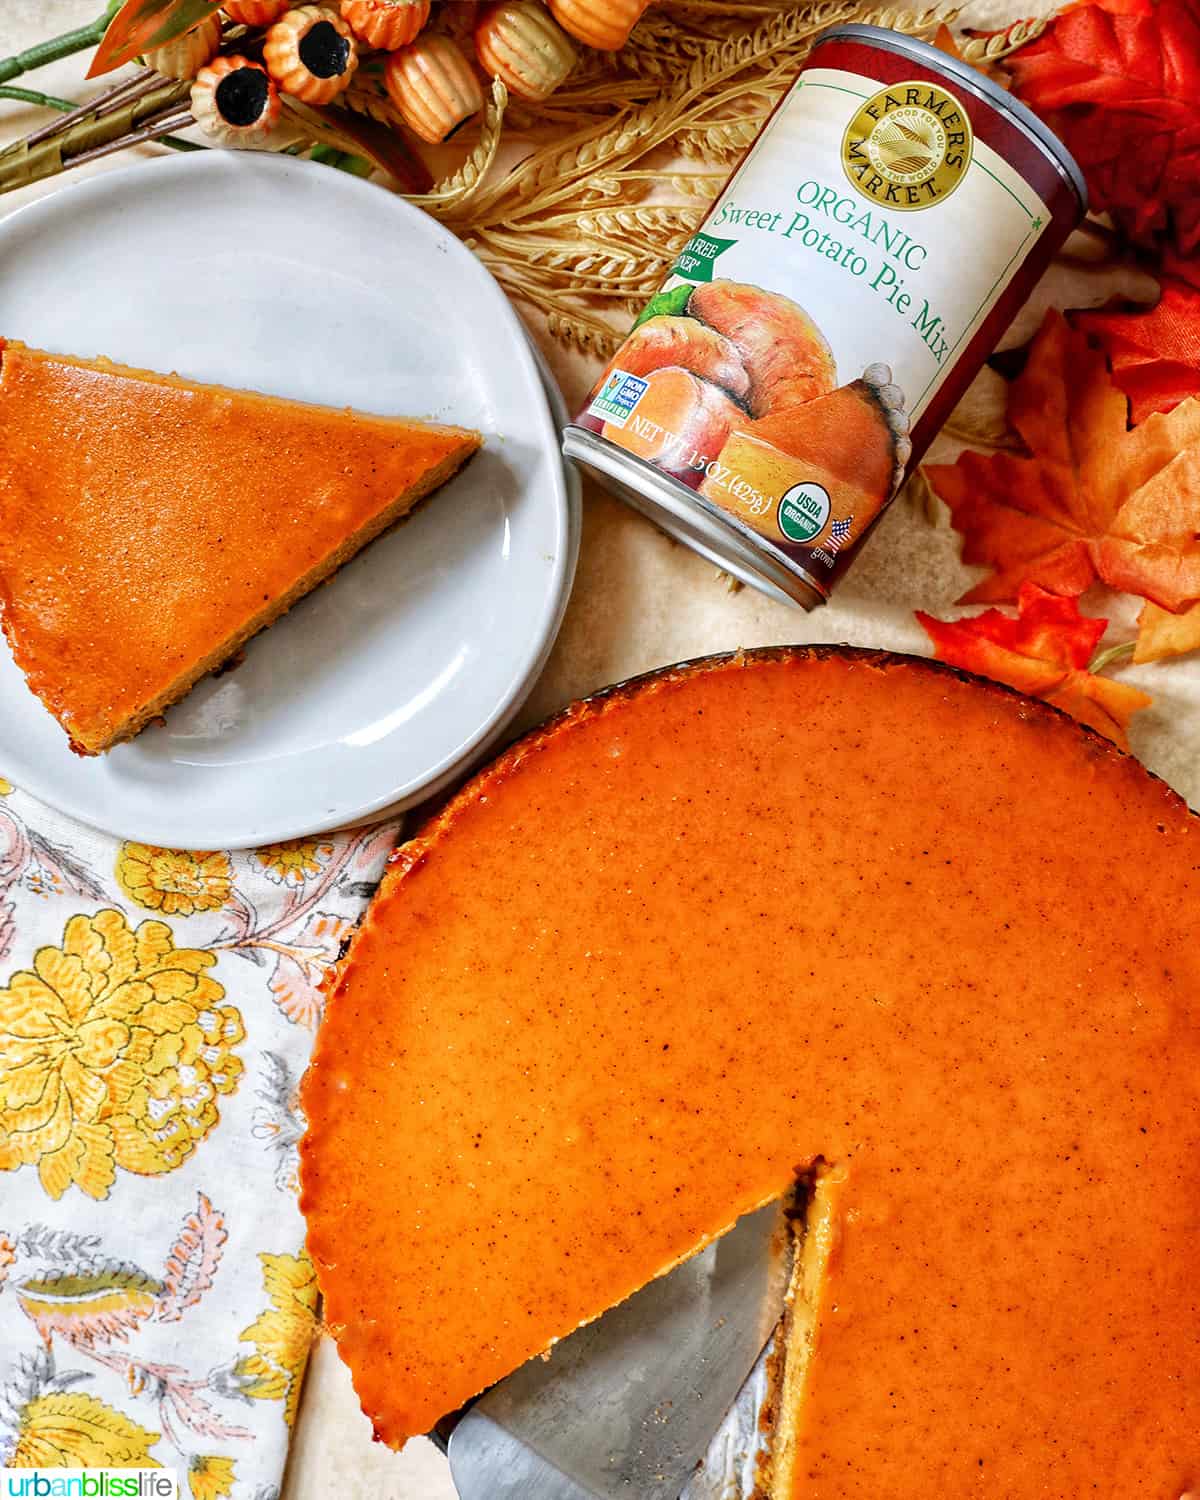 baked sweet potato pie in a pan with side of canned sweet potato pie mix.